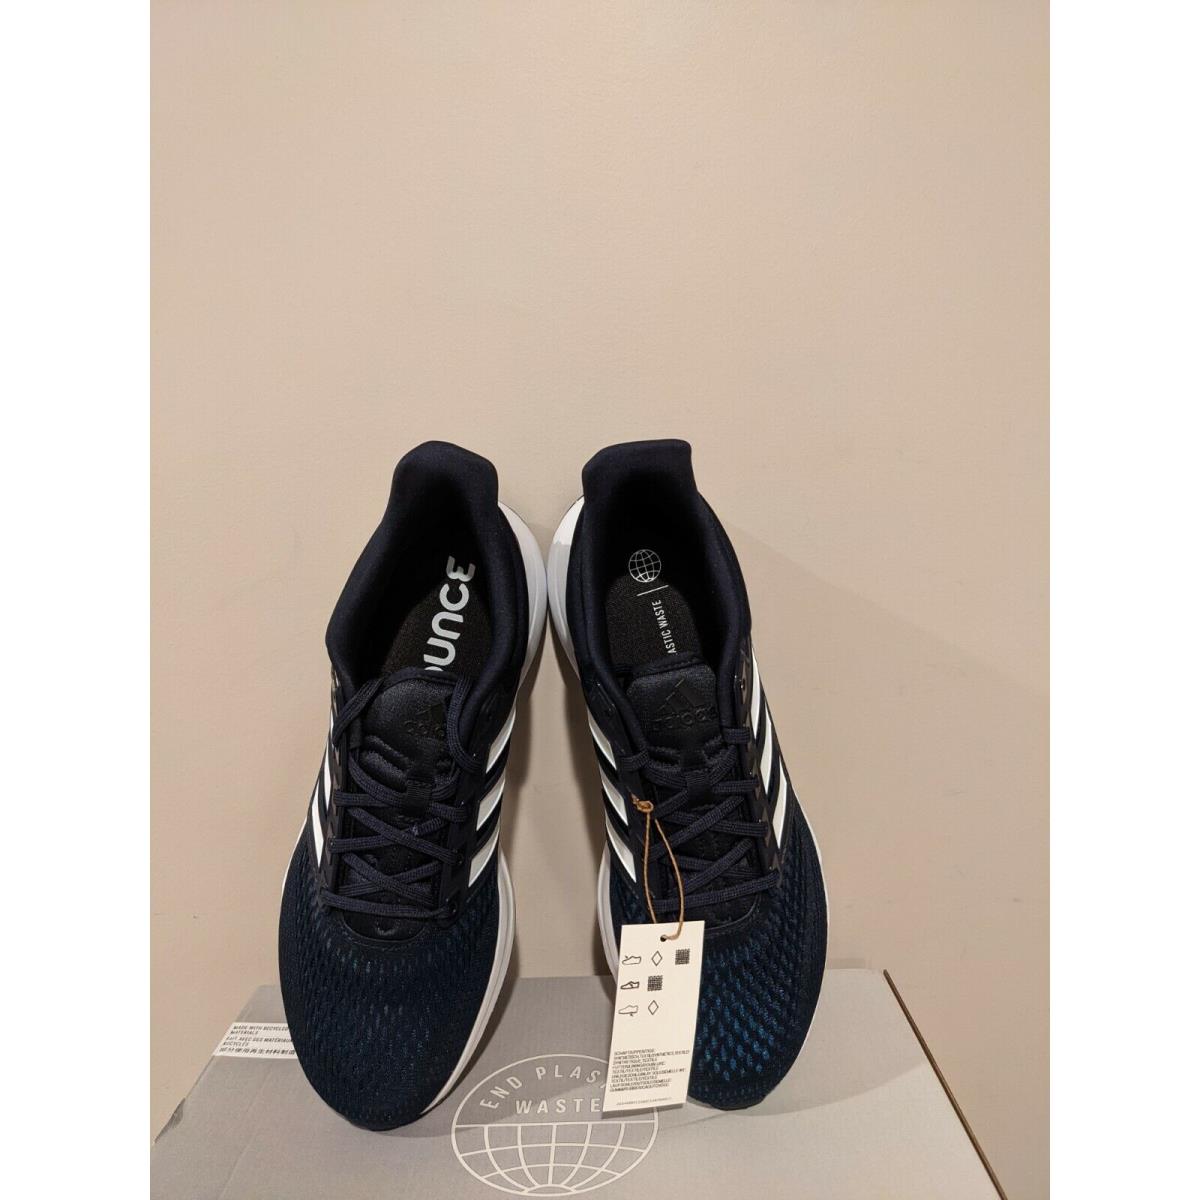 Adidas shoes  - Legend Ink / Cloud White / Crew Navy 1